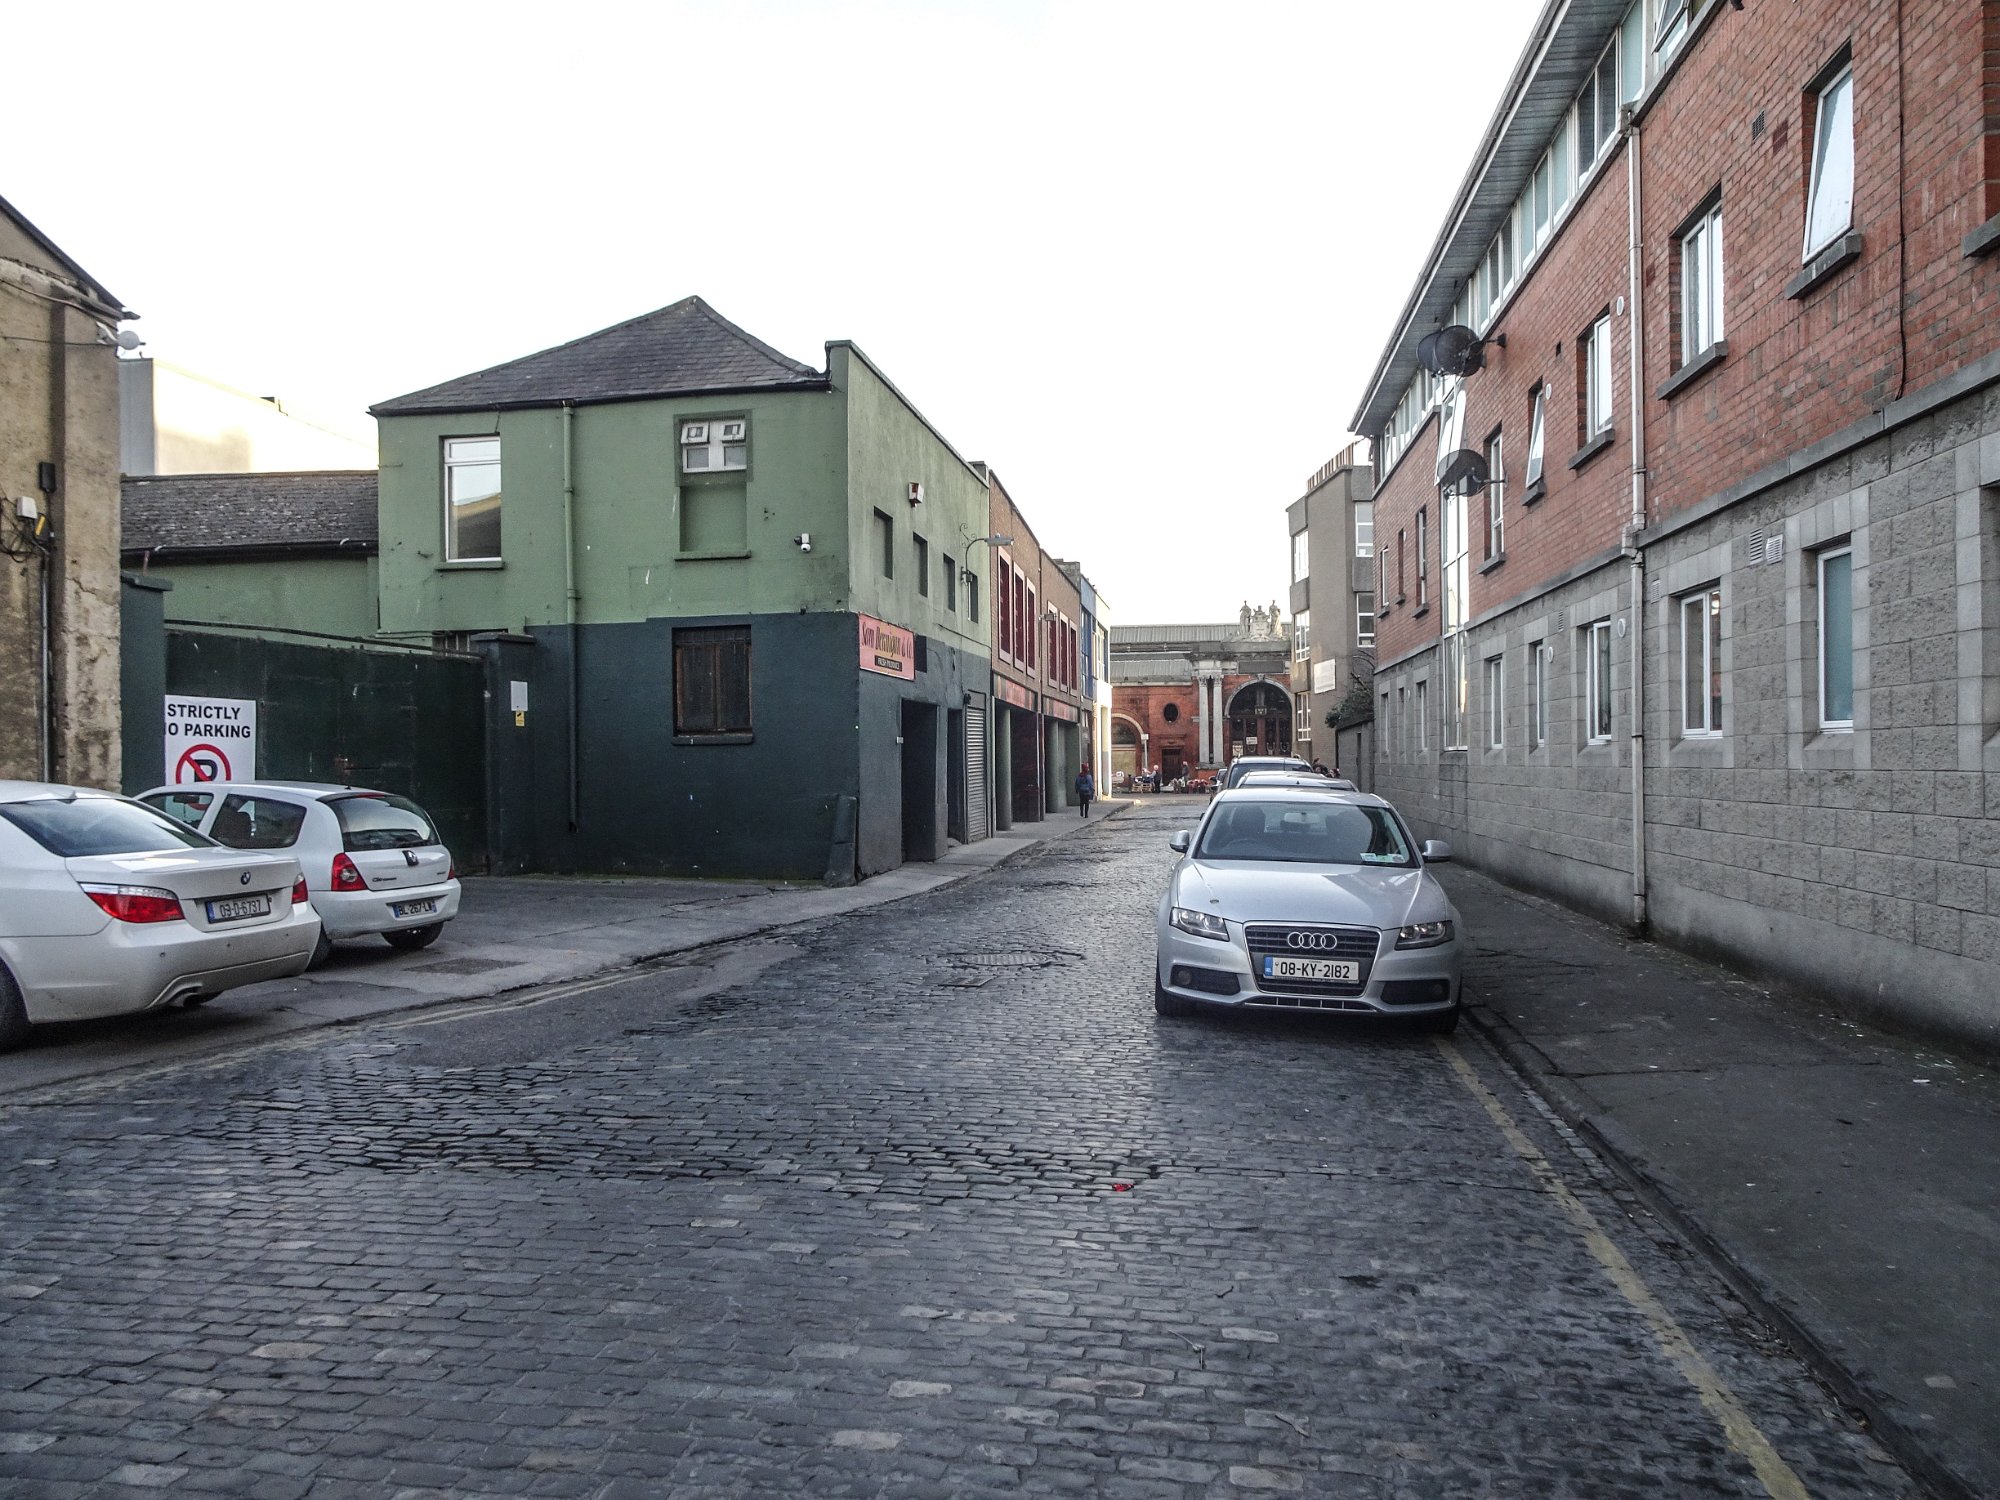 THE AREA OF DUBLIN OCCUPIED BY THE OLD VICTORIAN FRUIT AND VEGETABLE MARKET - AND NEARBY [CURRENTLY BEING REDEVELOPED]-149066-squashed